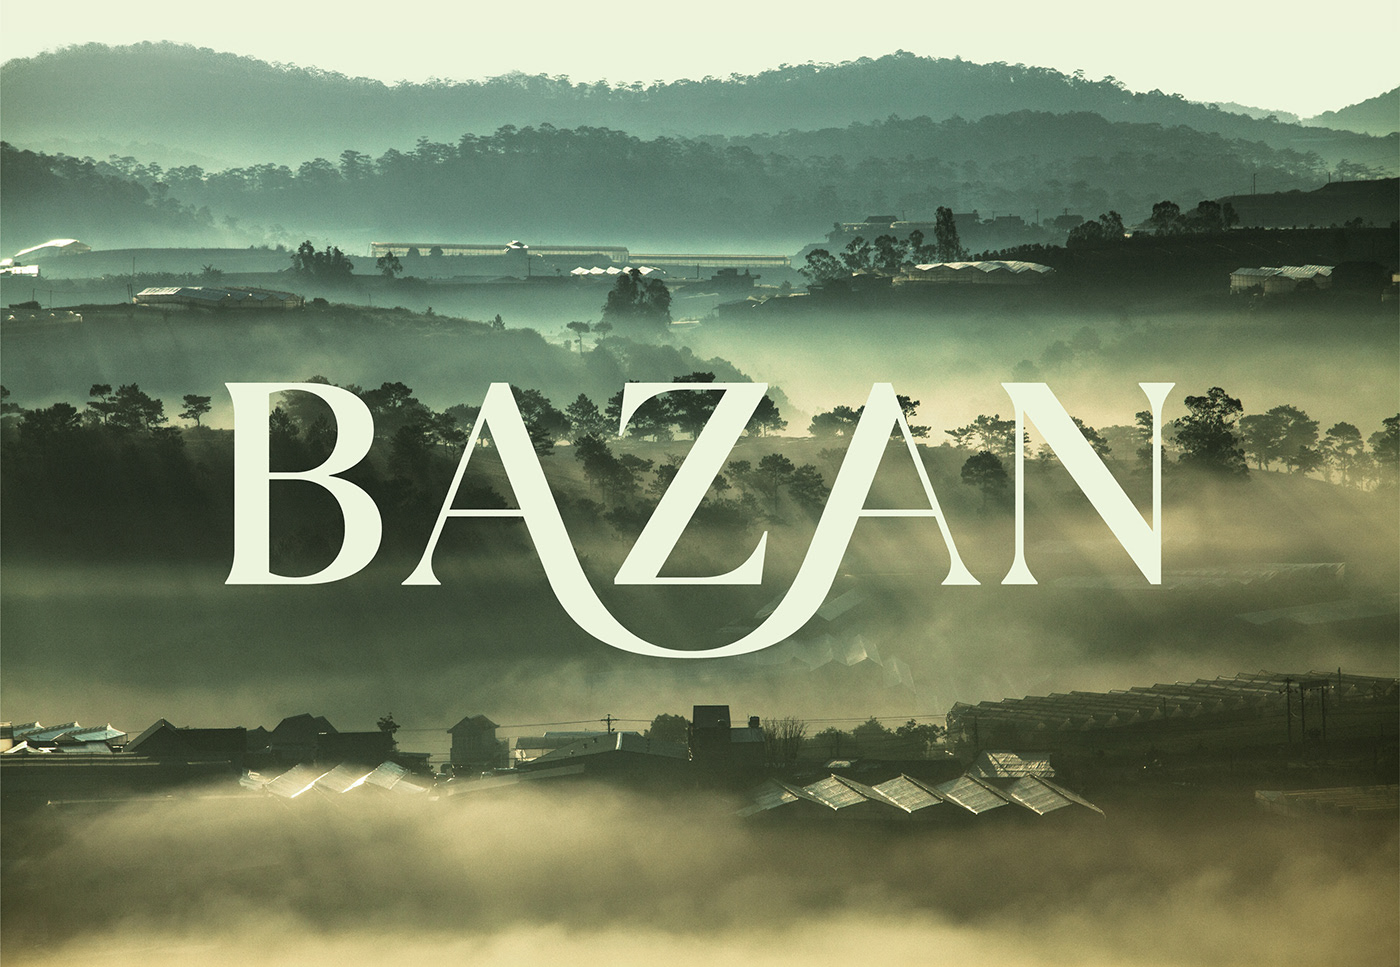 Bazan Hotel Brand and Visual Identity by The Fubo